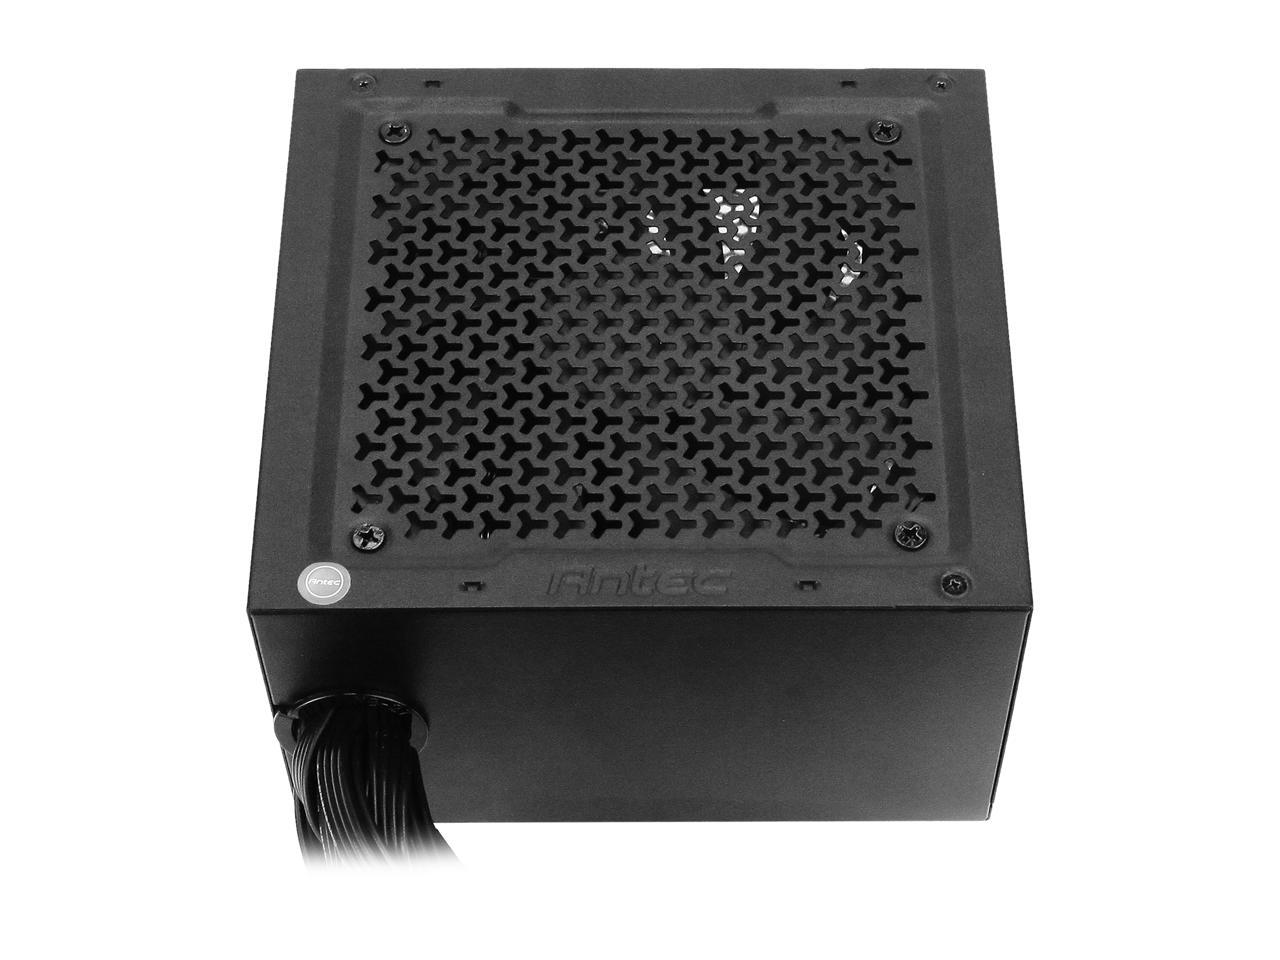 Antec NeoECO Gold Zen NE700G Zen Power Supply 700W, 80 PLUS GOLD Certified with 120mm Silent Fan, LLC + DC to DC Design, Japanese Caps, CircuitShield Protection, 5-Year Warranty